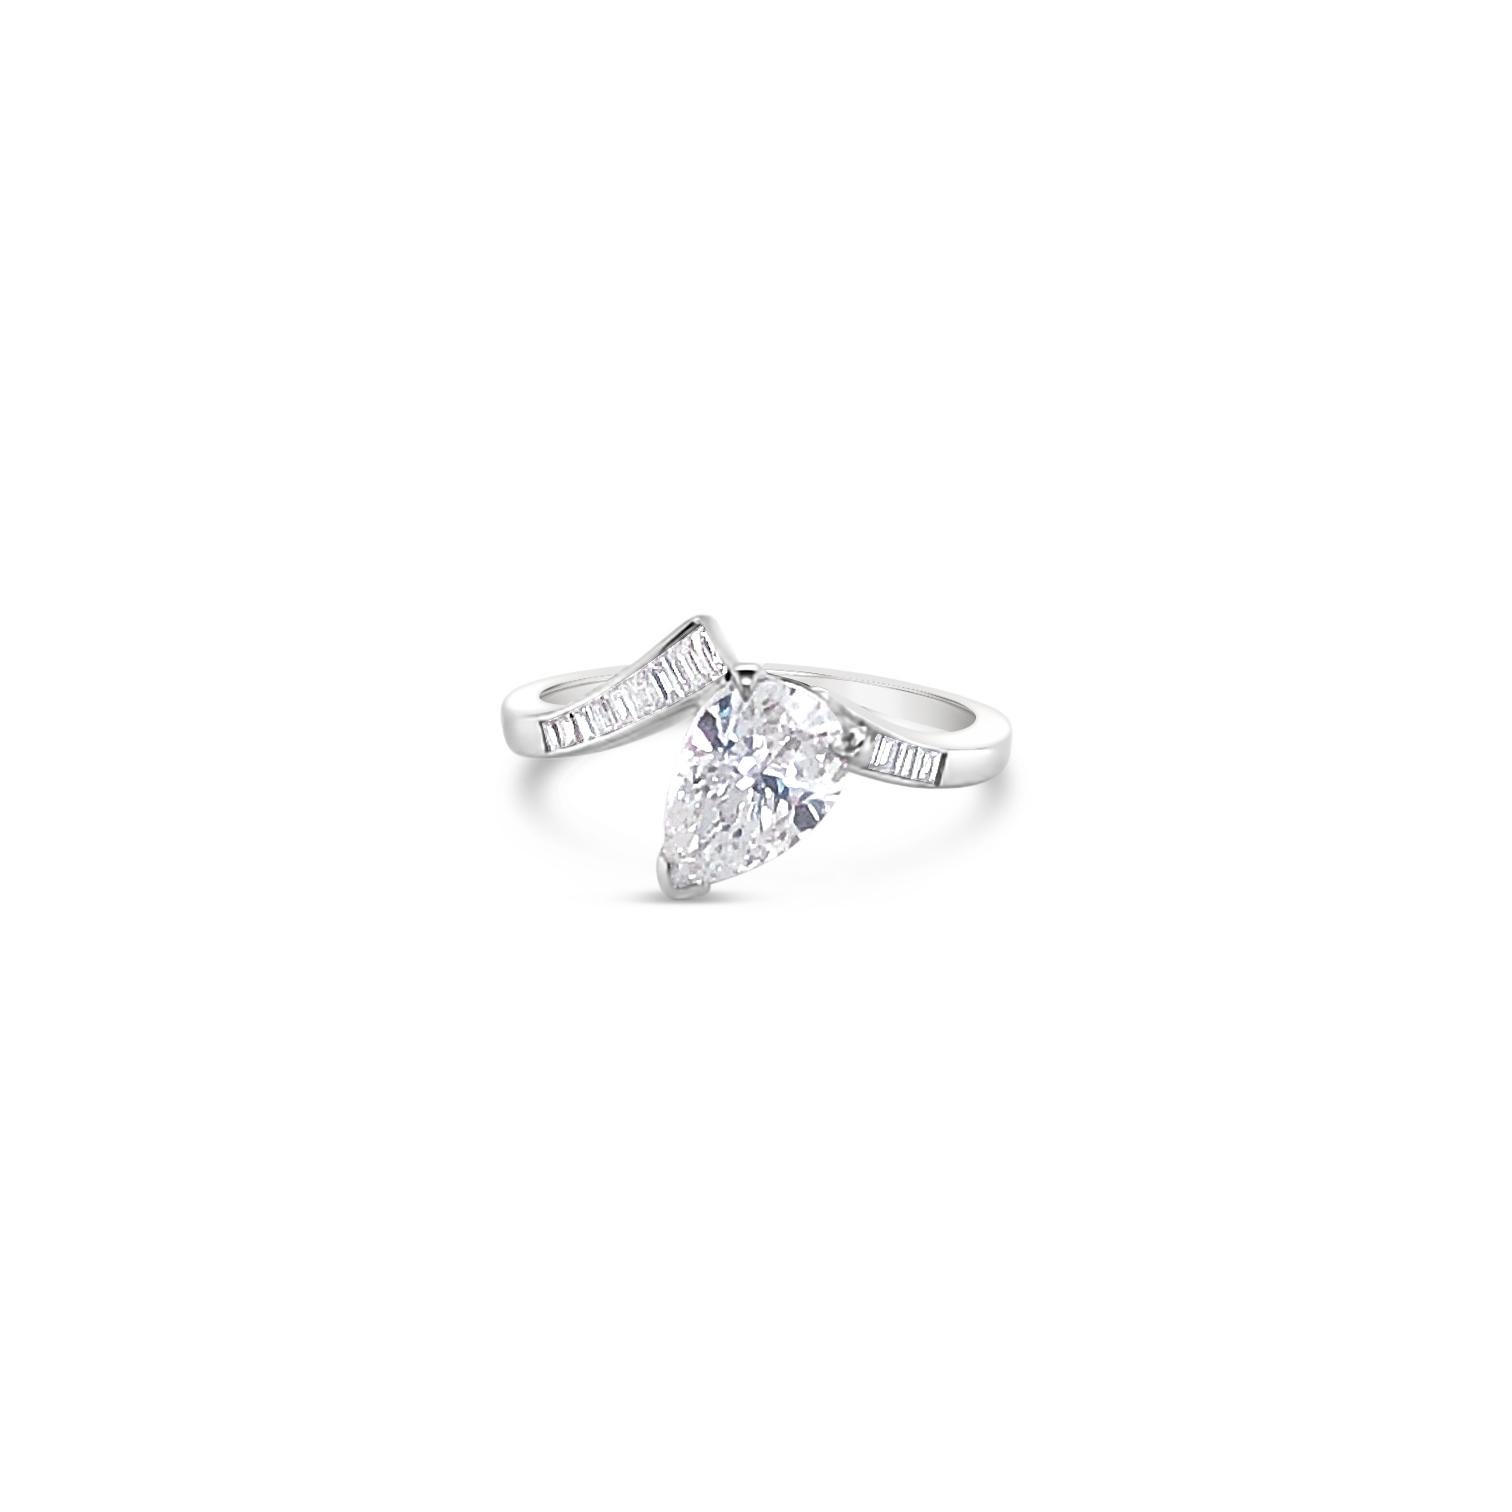 1.09 Carat Pear Shaped Diamond Ring with Baguette Side Diamonds set in 14 Karat White Gold.  Primary stone has Color G, Clarity SI2.  Side diamonds are 0.80 Carat 'total weight'.